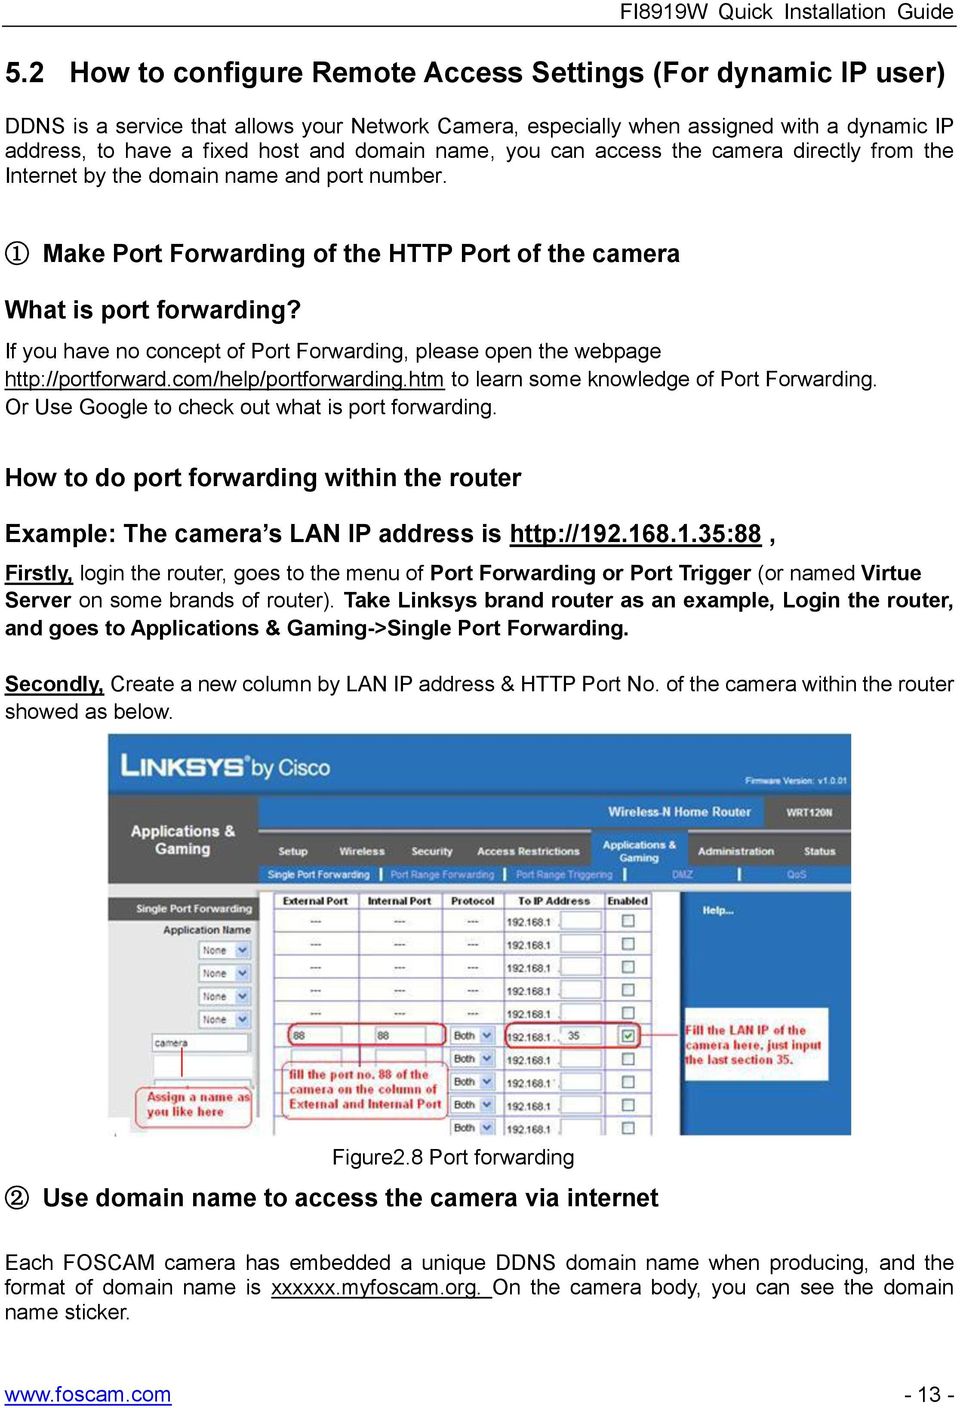 If you have no concept of Port Forwarding, please open the webpage http://portforward.com/help/portforwarding.htm to learn some knowledge of Port Forwarding.